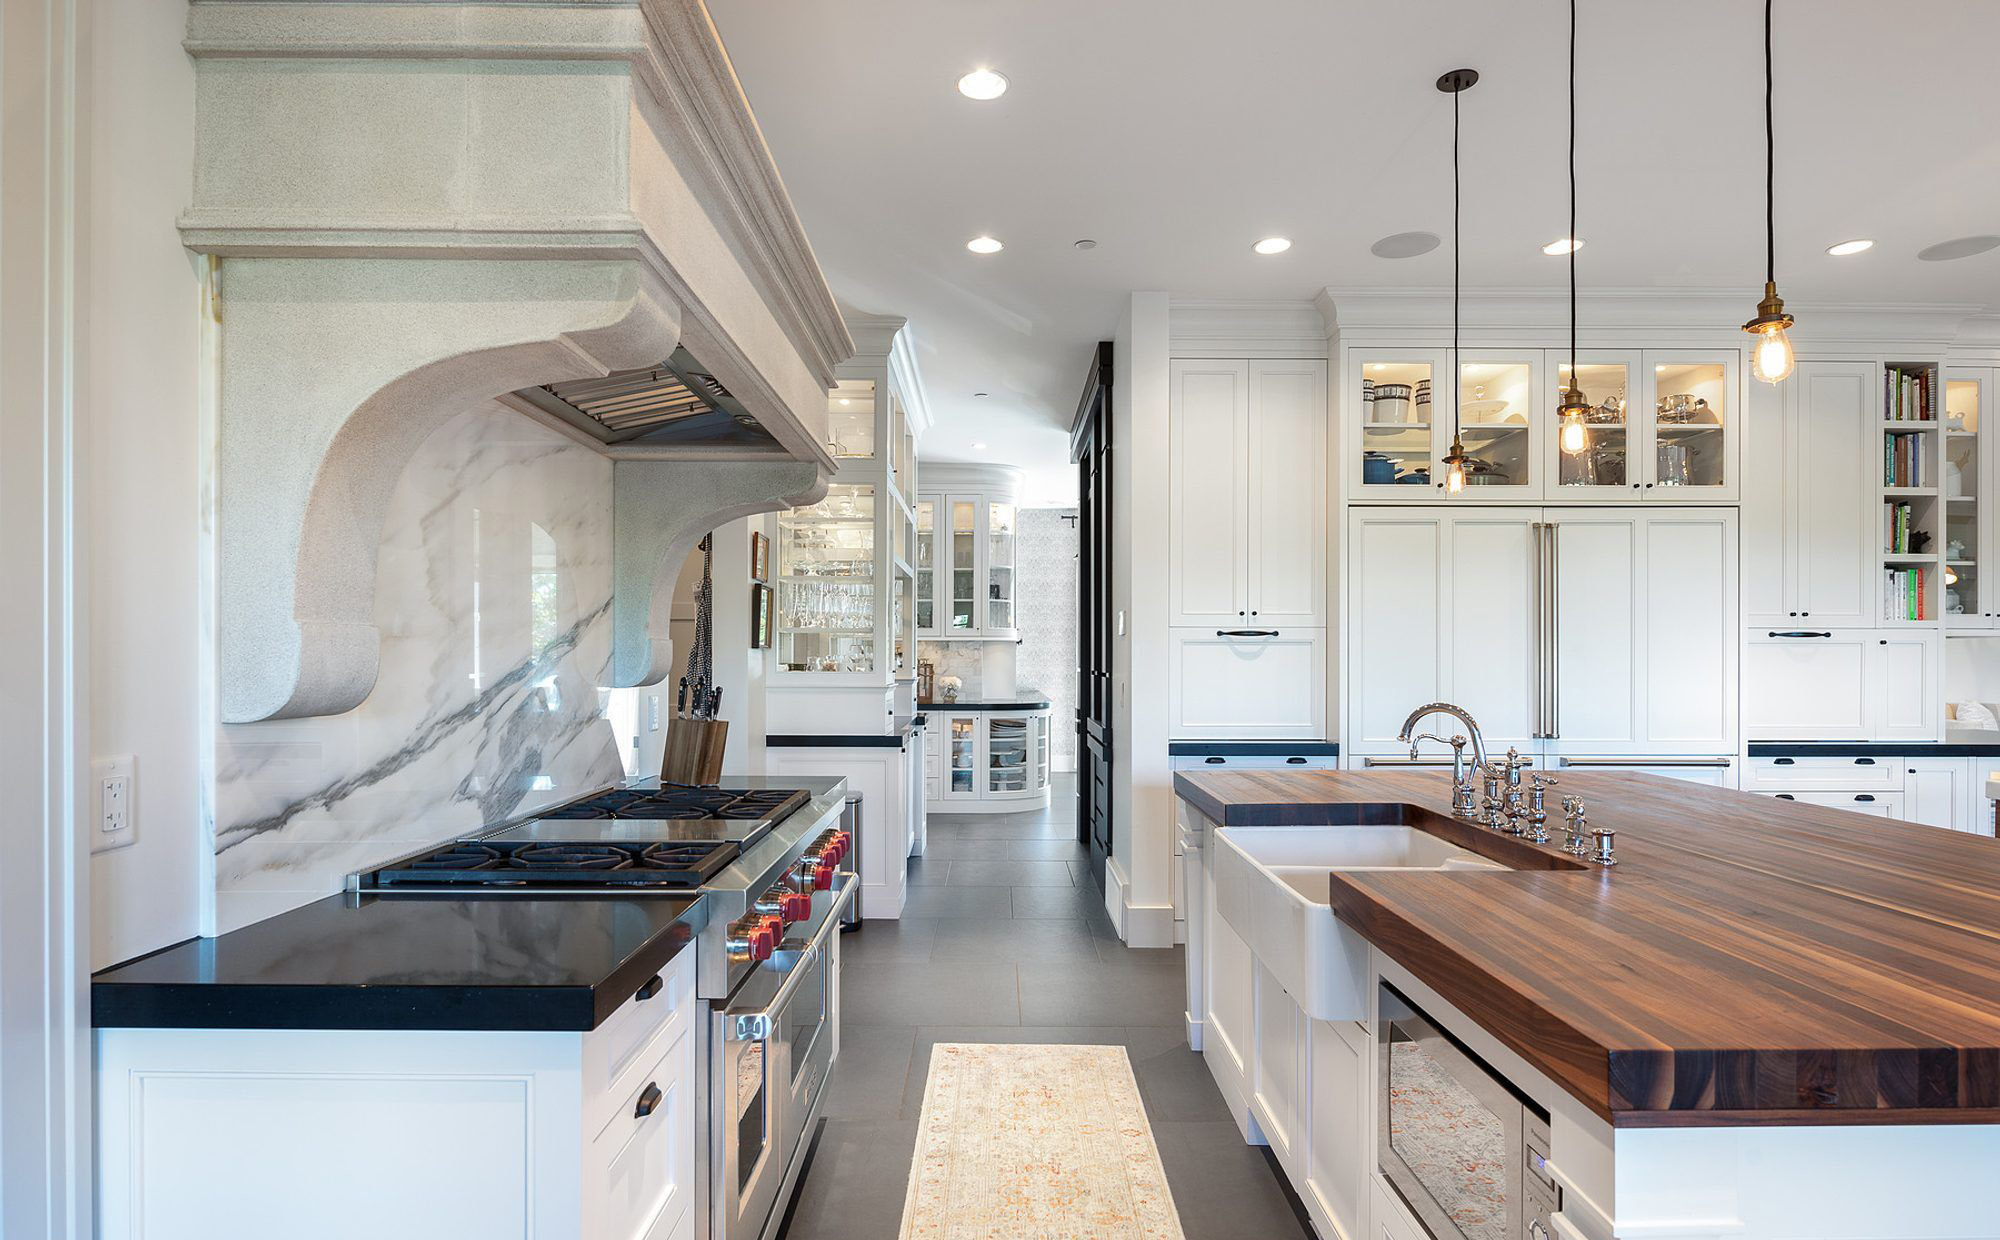 Beautiful kitchen with two different countertop colors, black and butcher block.